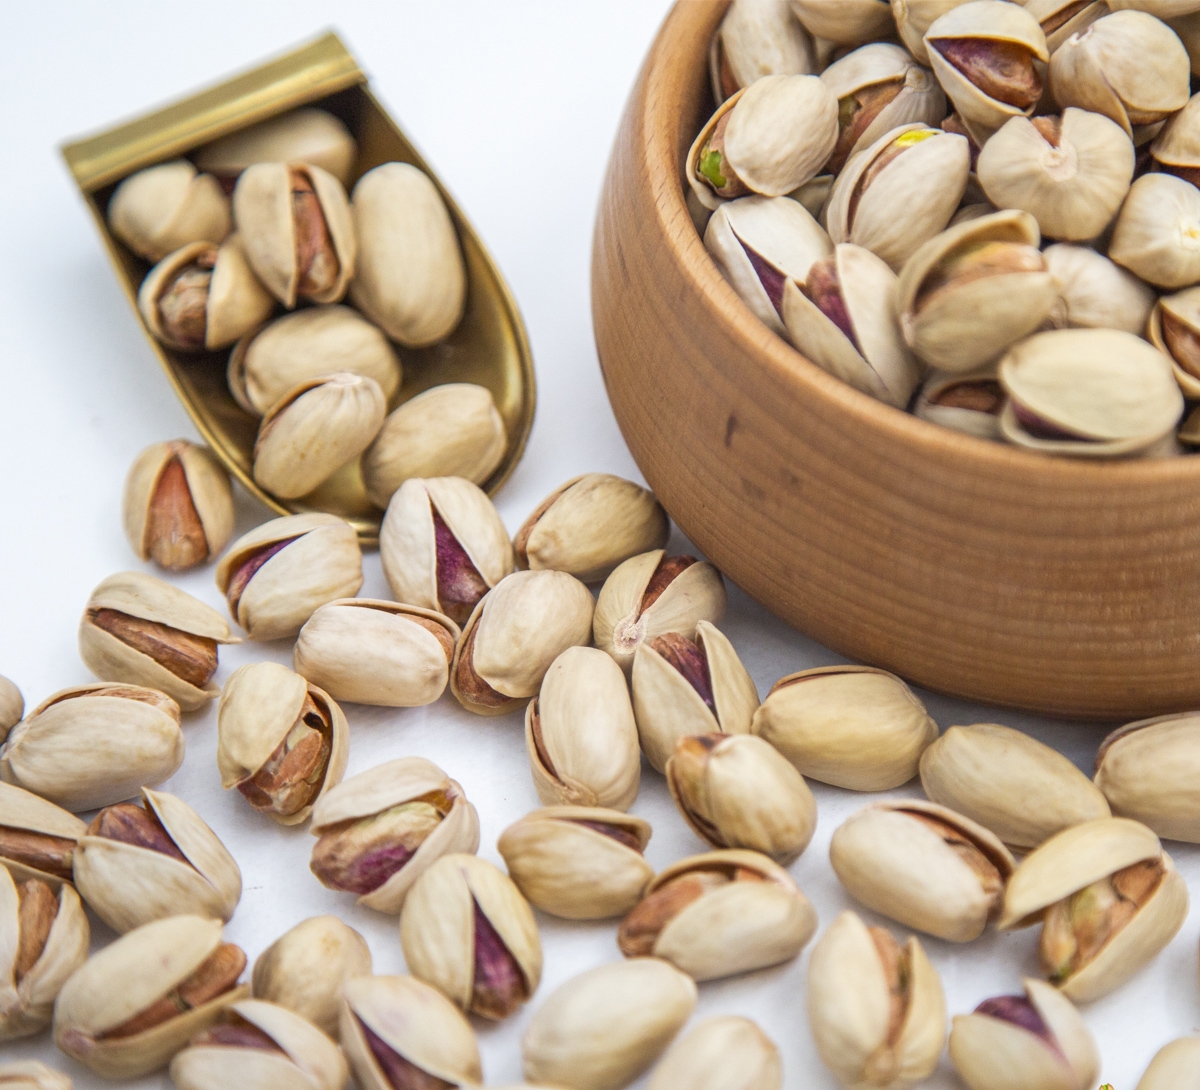 Bulk Purchase of Fandoghi Pistachios at Reasonable Prices